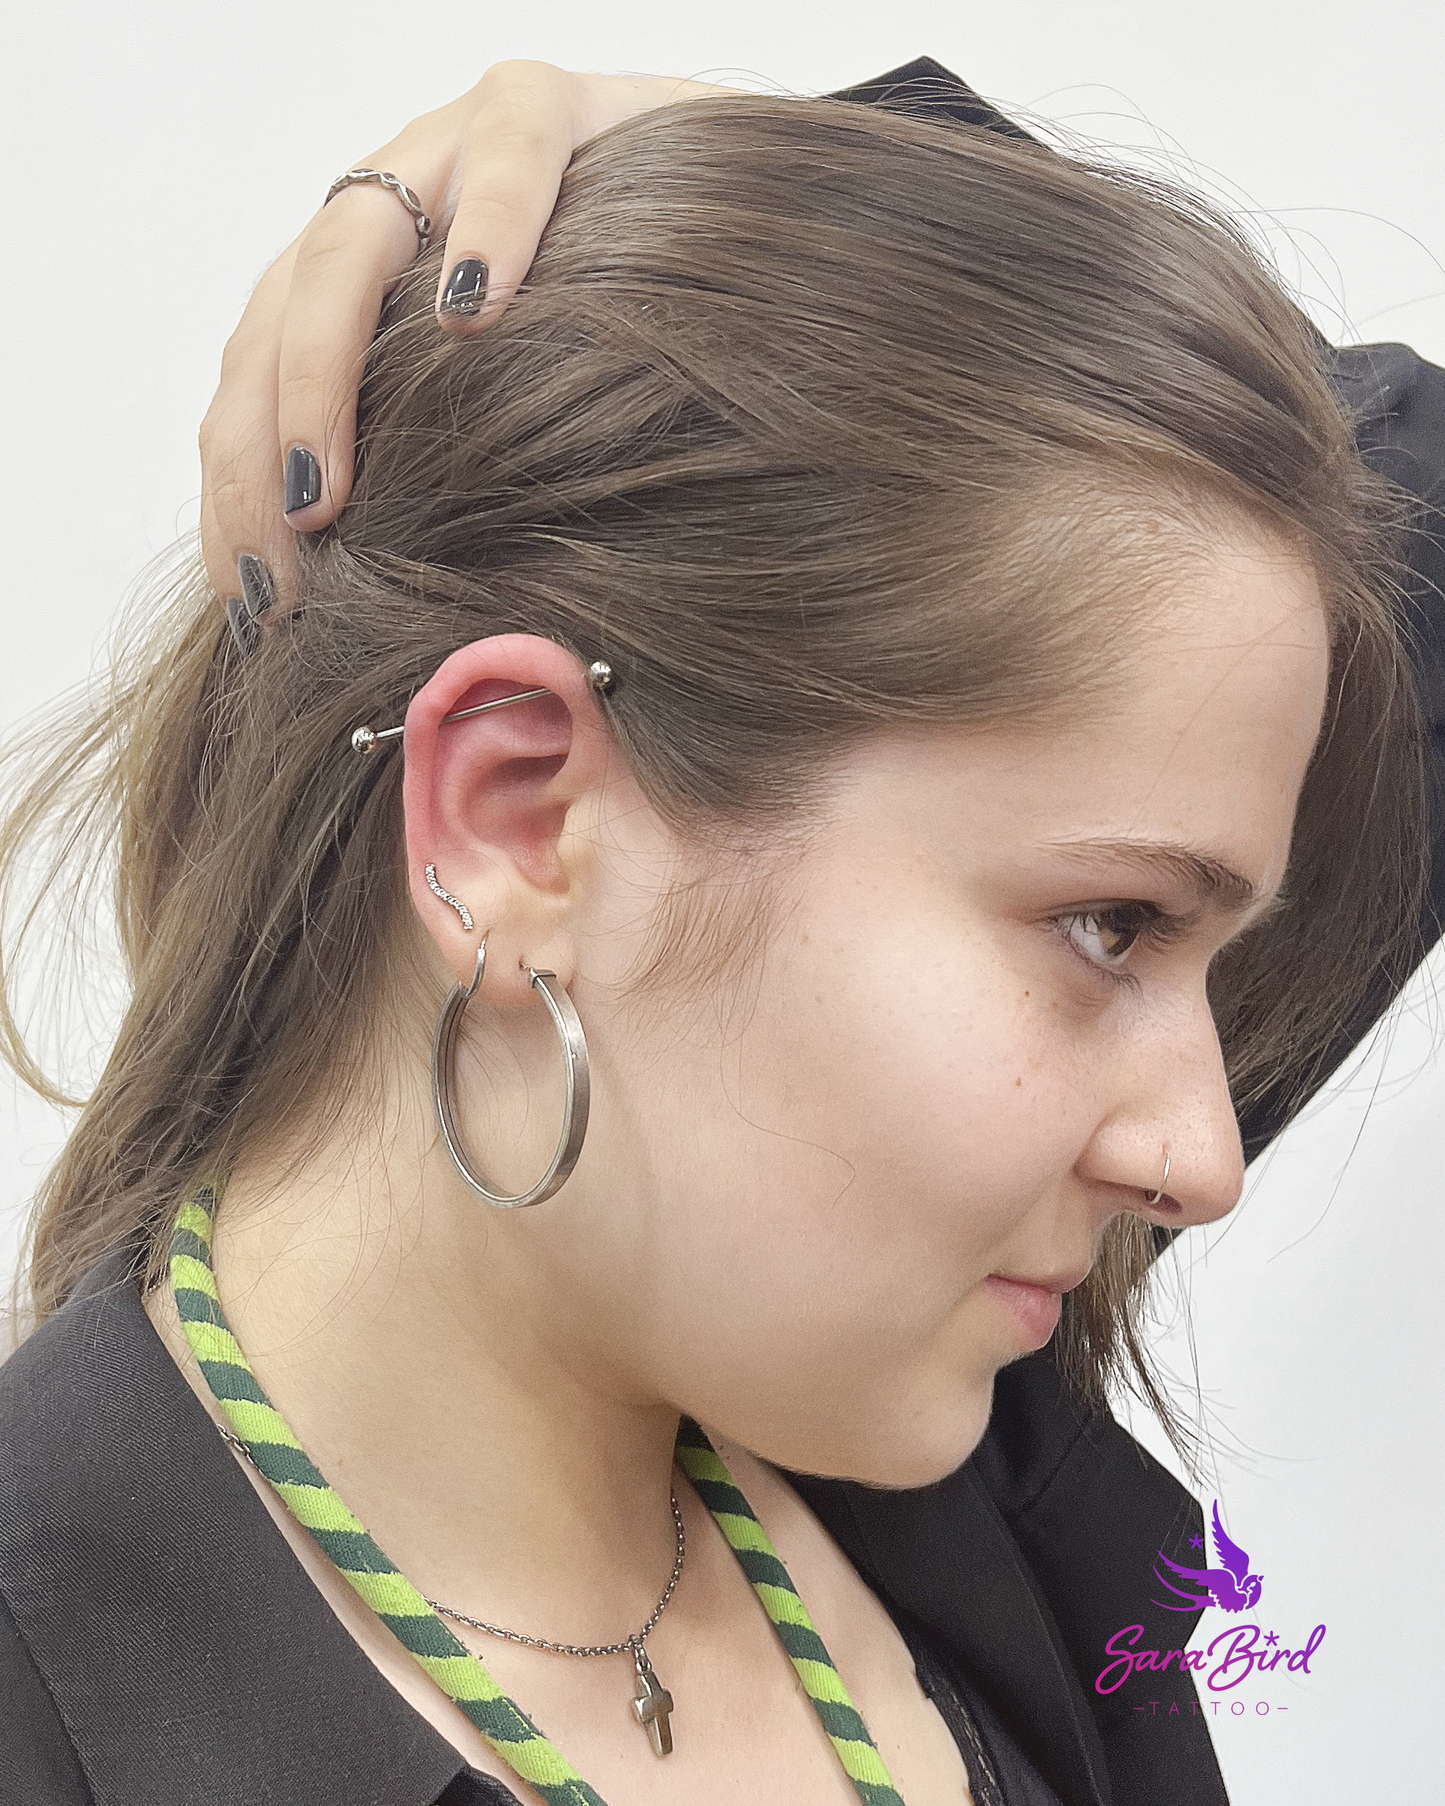 Titanium Jeweled Ear Piecing + Anesthetic + Healing Support